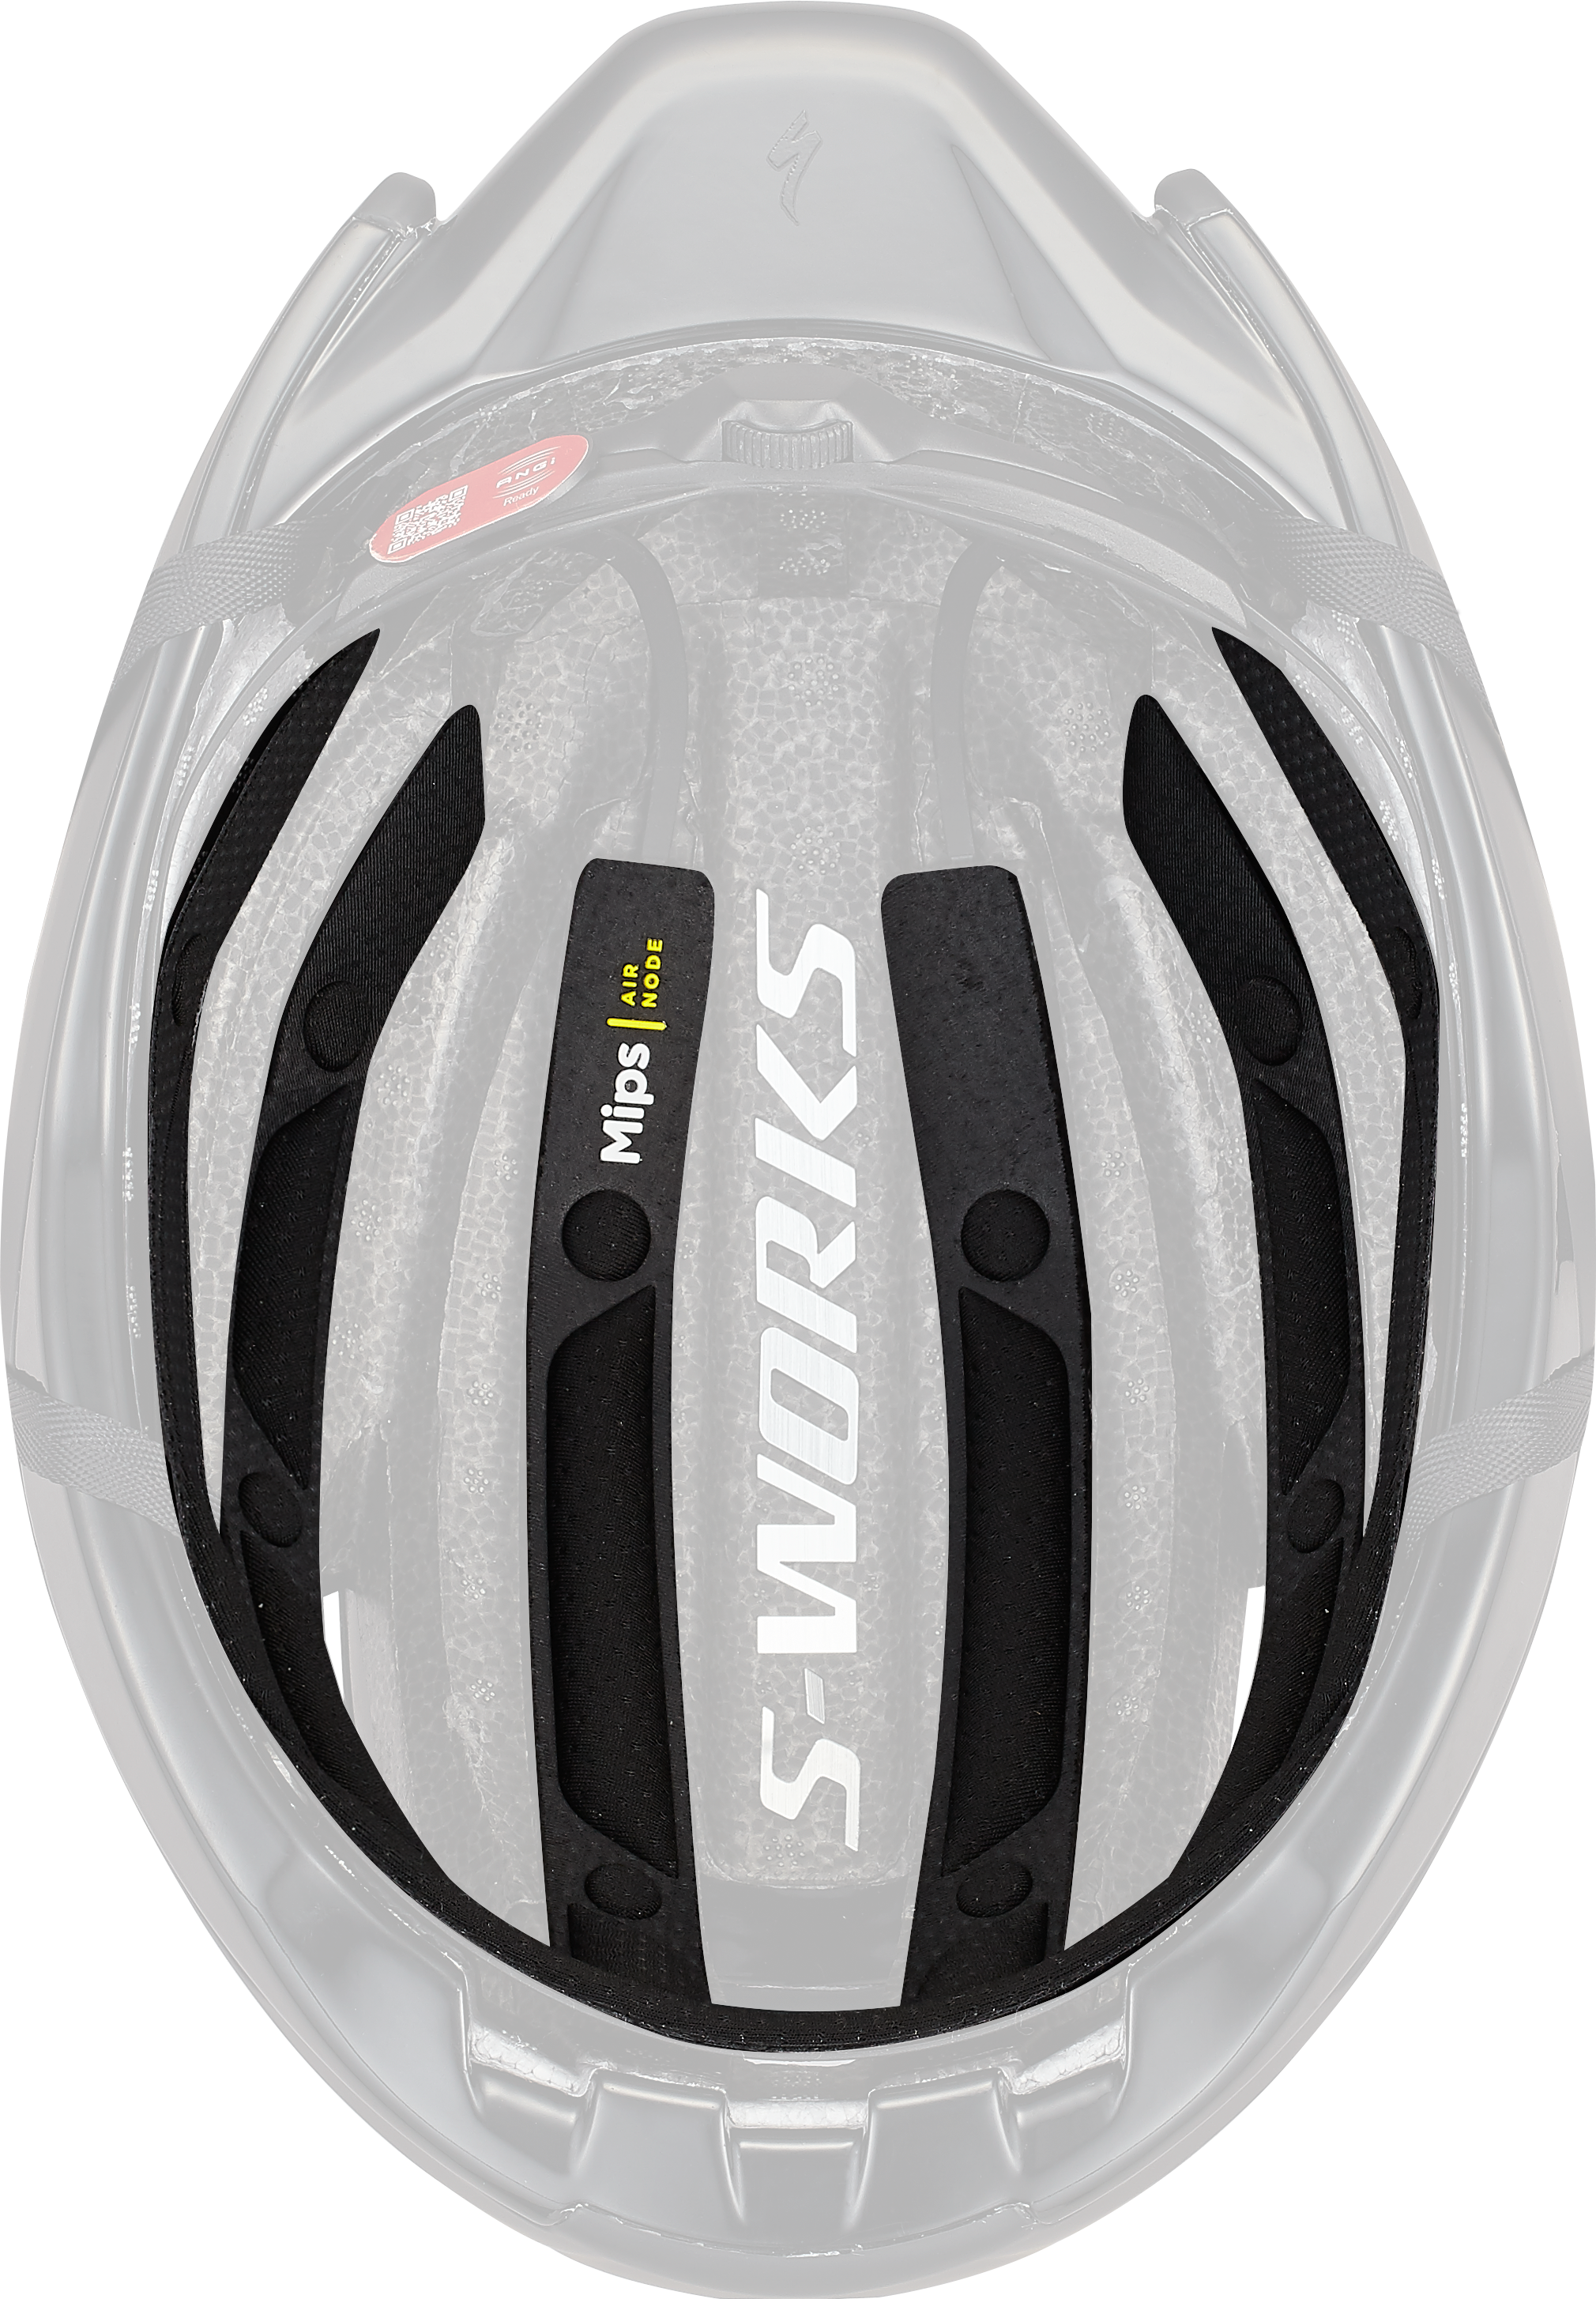 S-WORKS EVADE 3 REPLACEMENT PADSET M(M ブラック): ヘルメット 